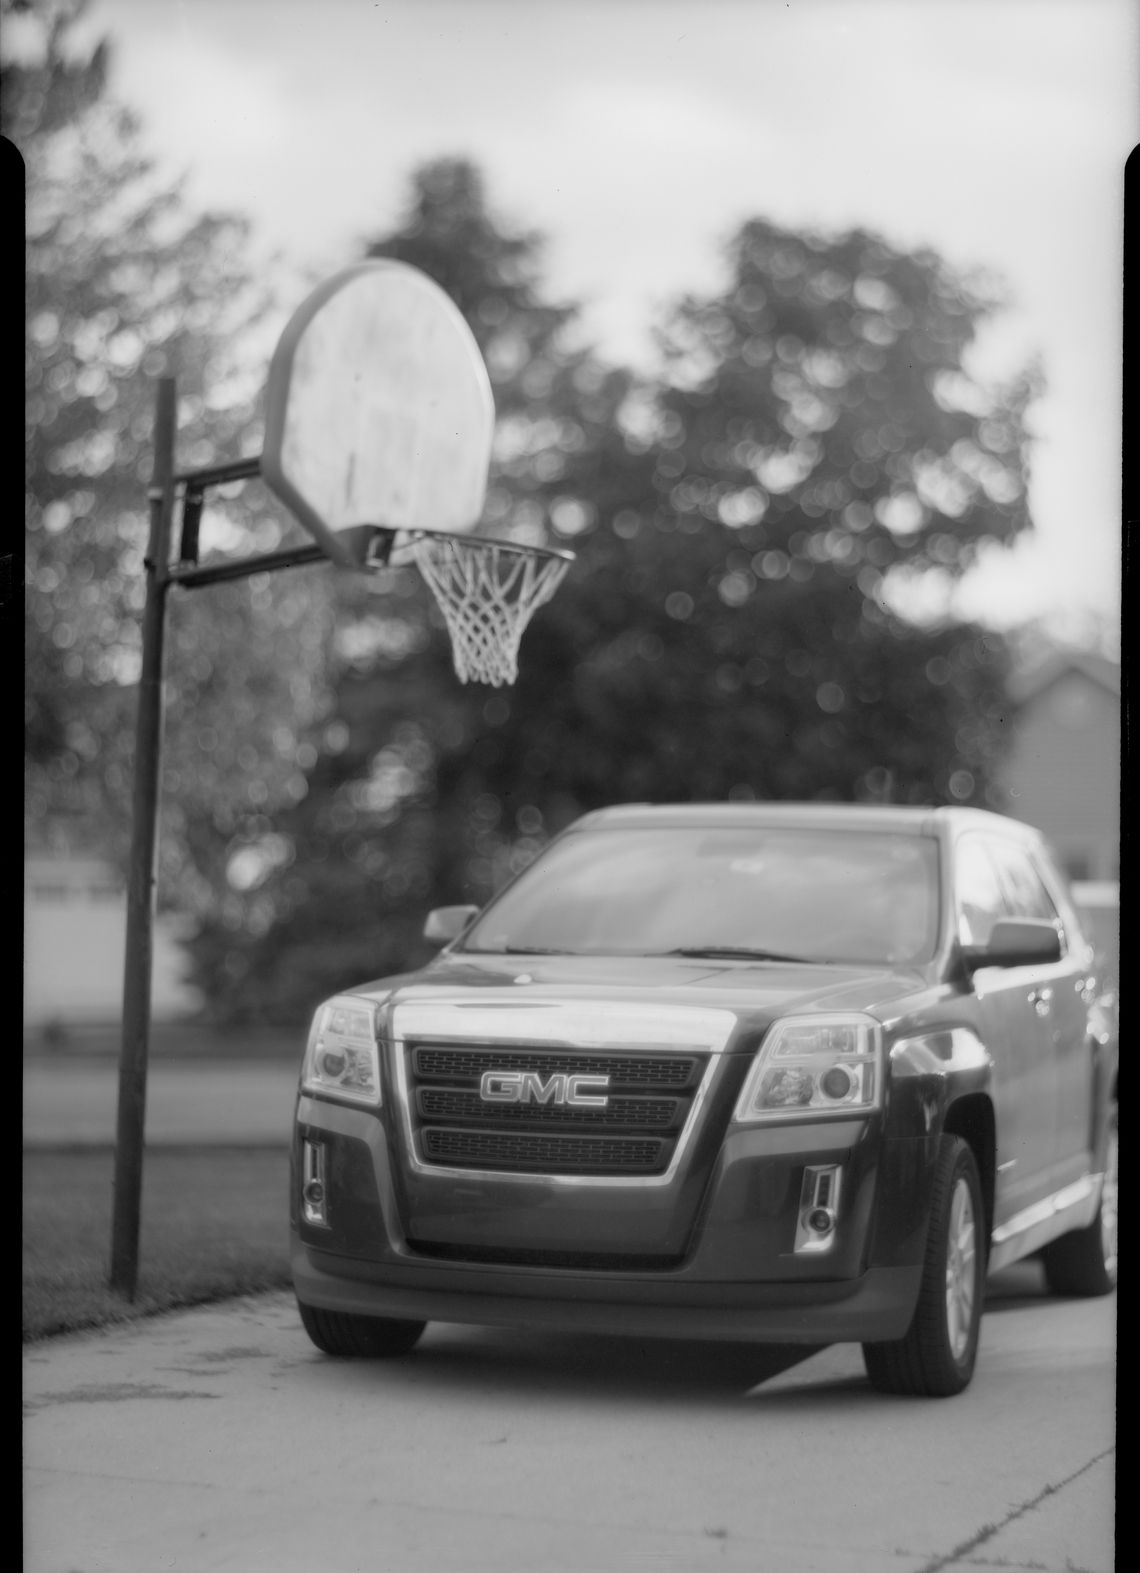 Car in front of basketball hoop